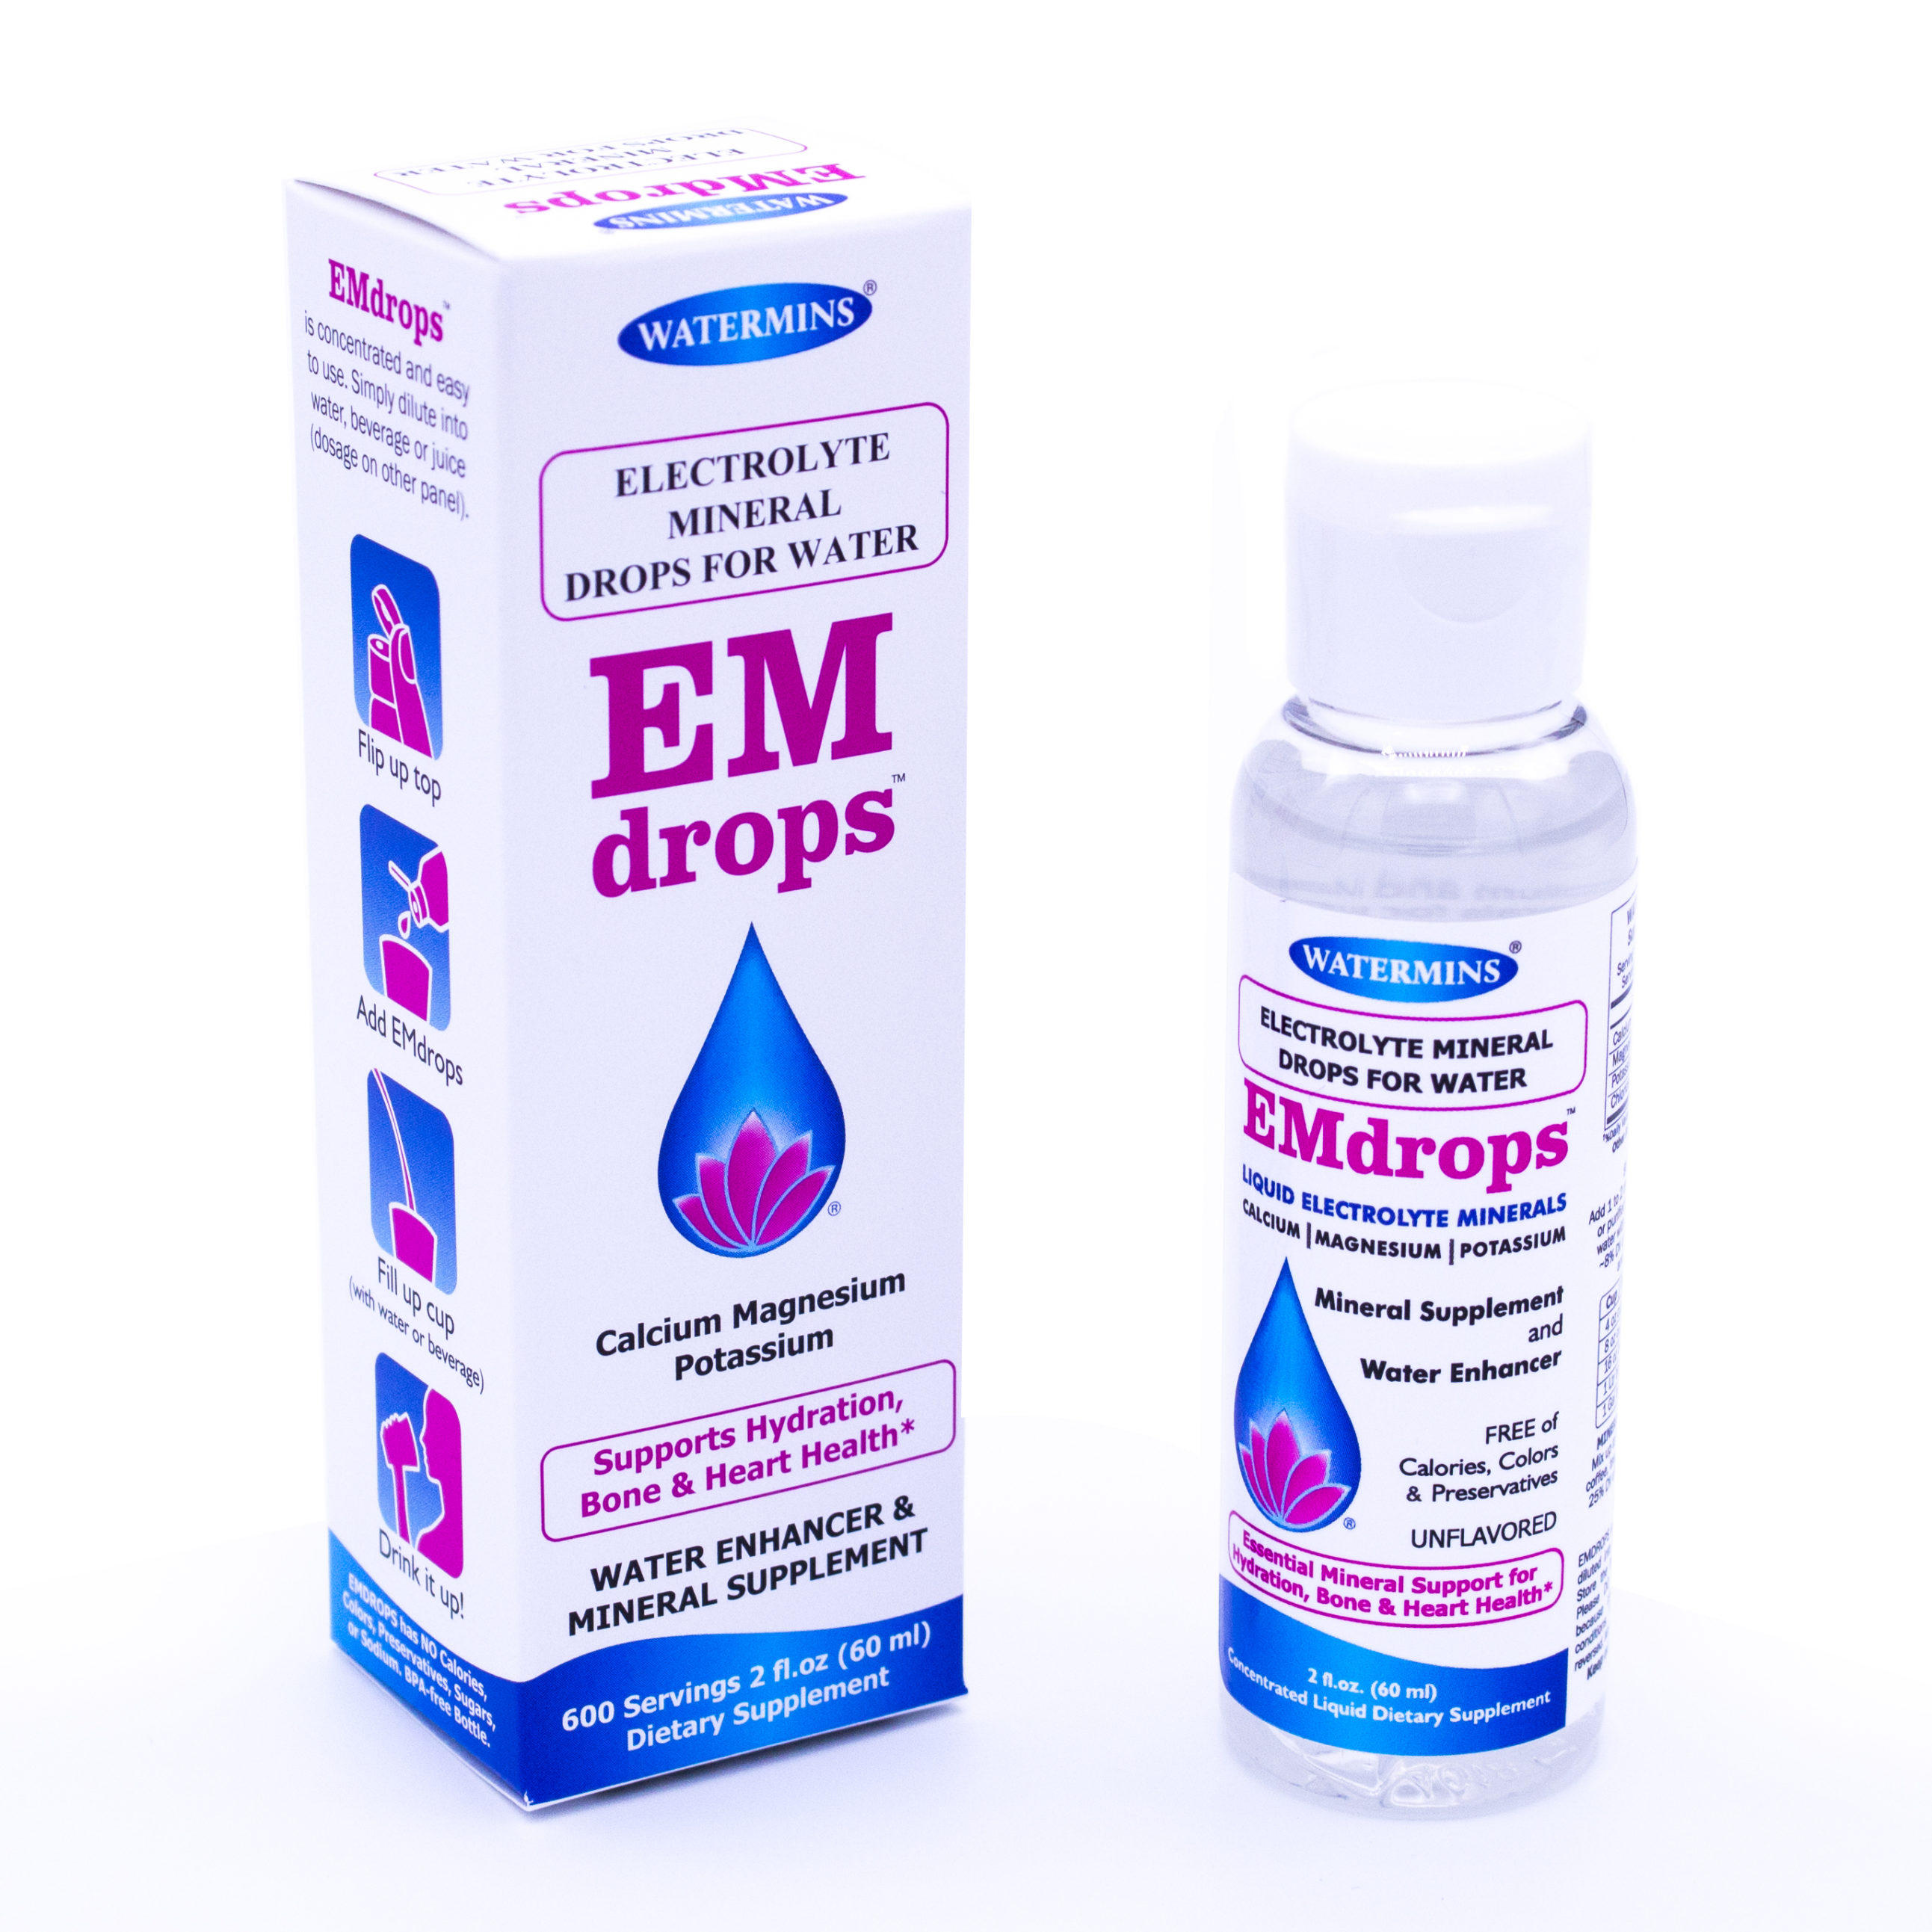 EMdrops product photo - carton and bottle - to be displayed with reviews and testimonials